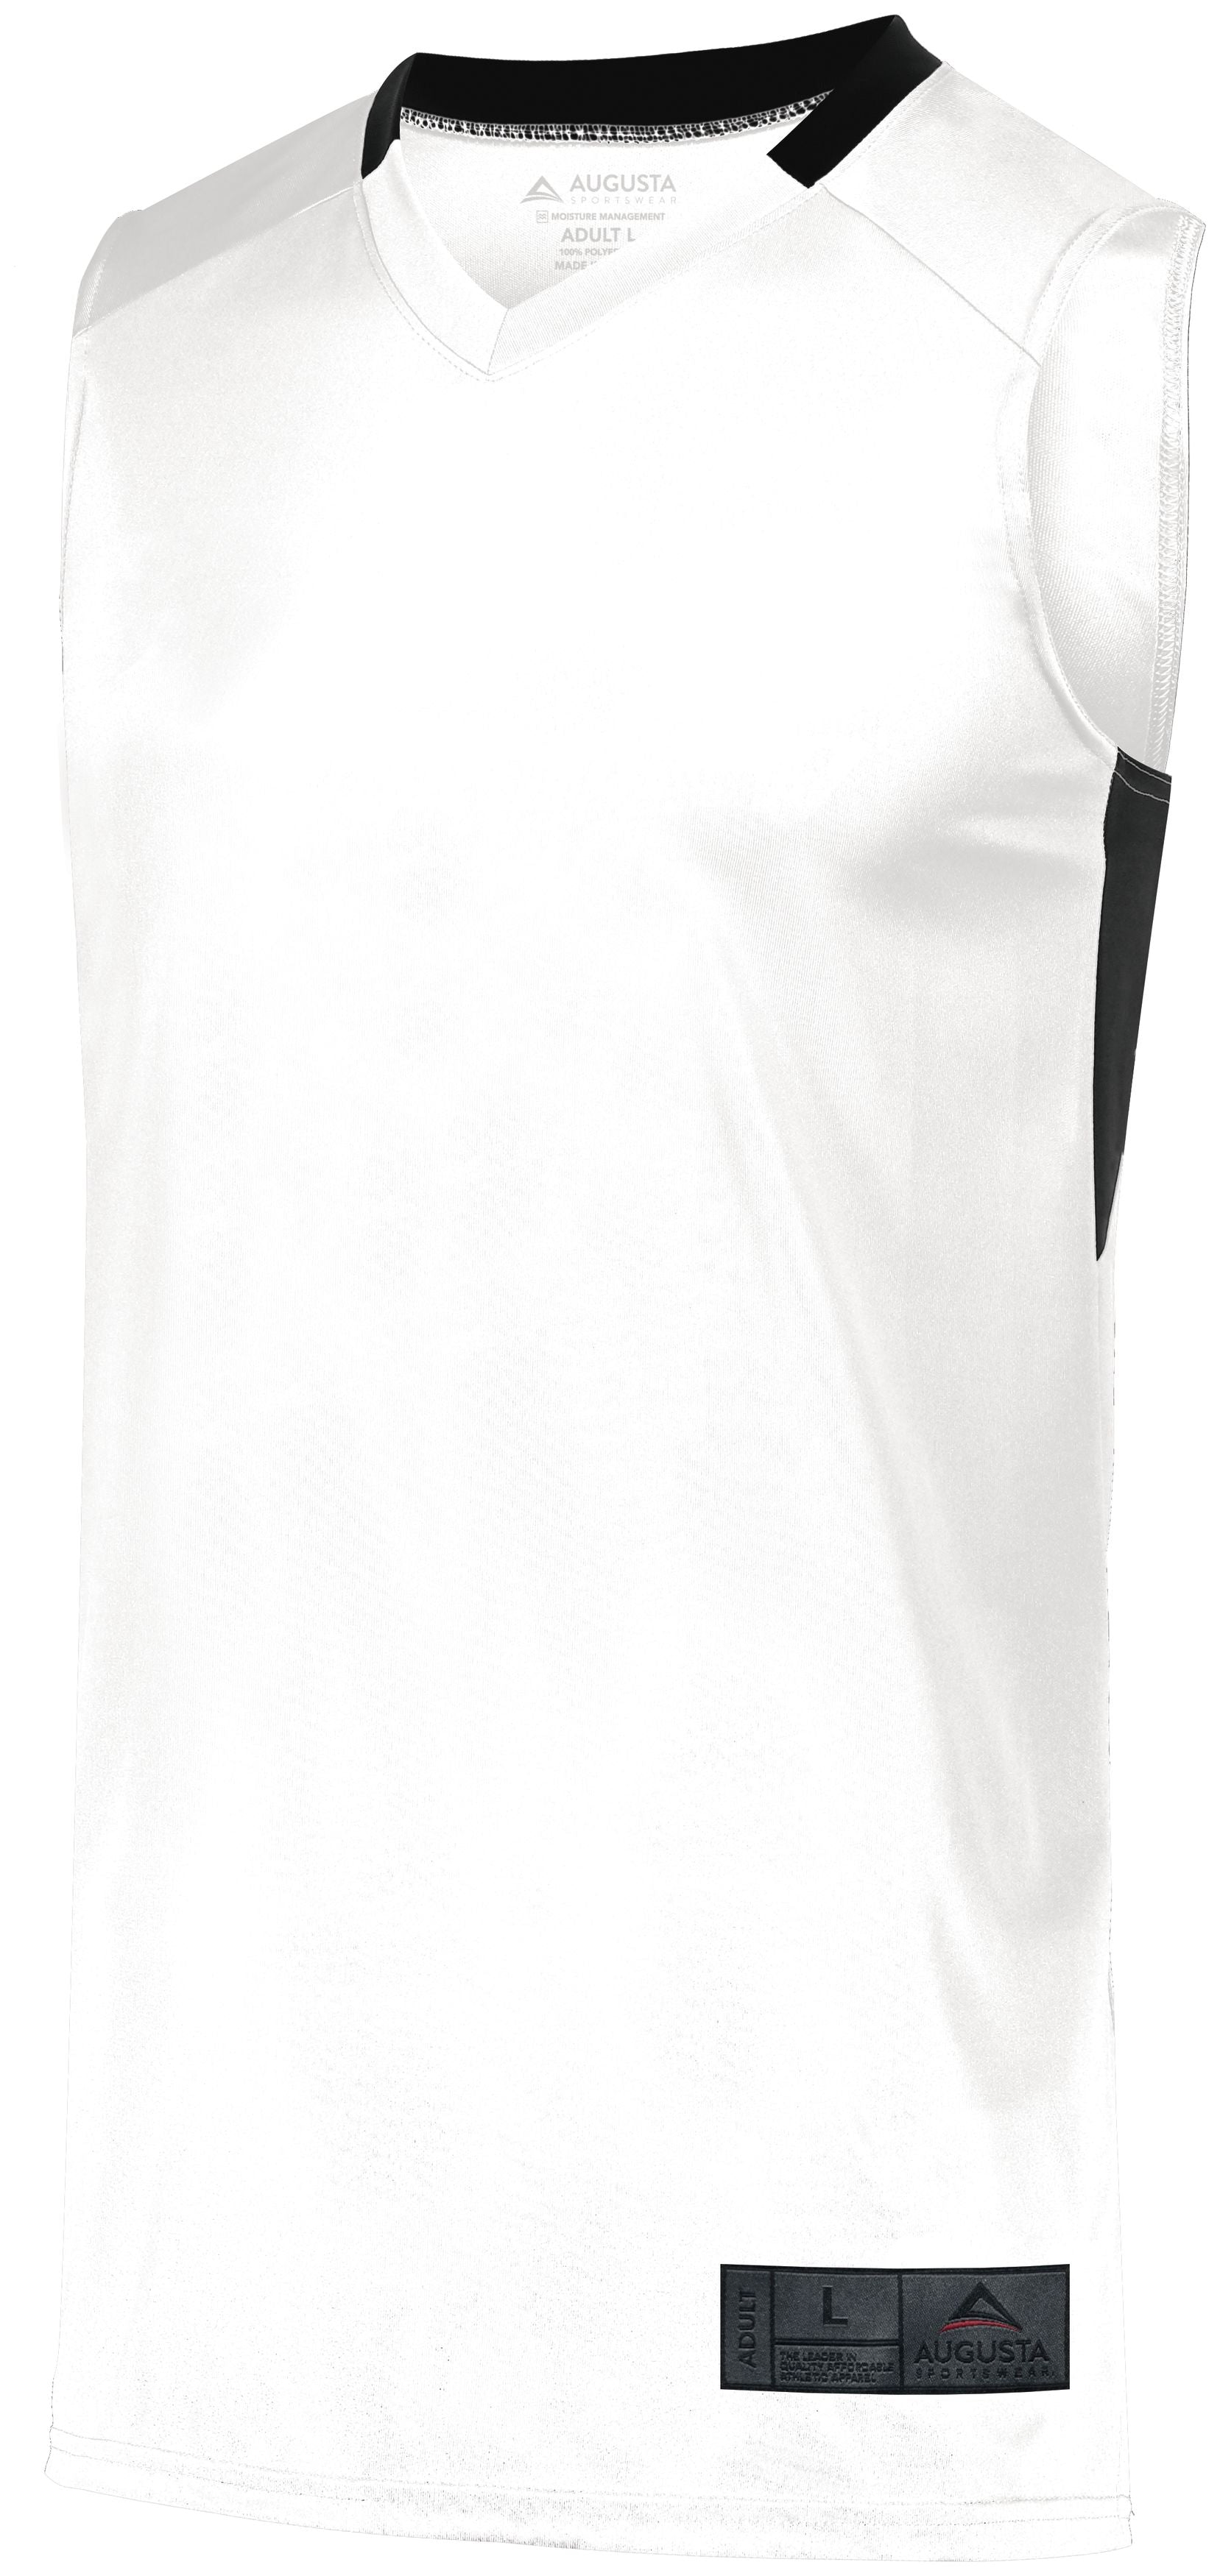 Augusta Sportswear Step-Back Basketball Jersey in White/Black  -Part of the Adult, Adult-Jersey, Augusta-Products, Basketball, Shirts, All-Sports, All-Sports-1 product lines at KanaleyCreations.com